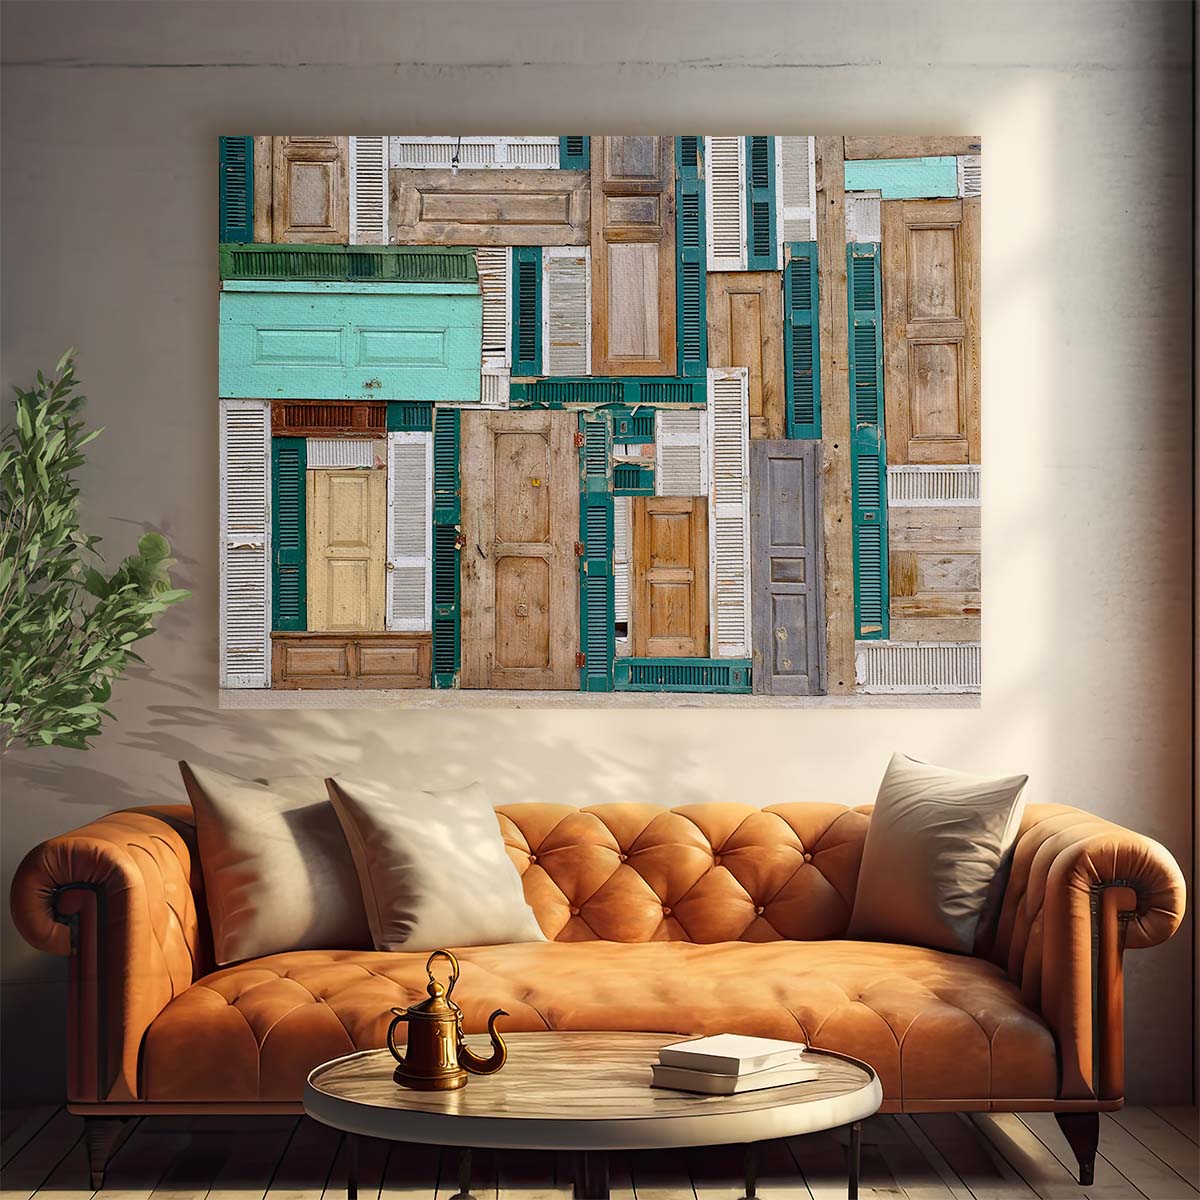 Abstract Doors & Urban Architecture Wall Art by Luxuriance Designs. Made in USA.